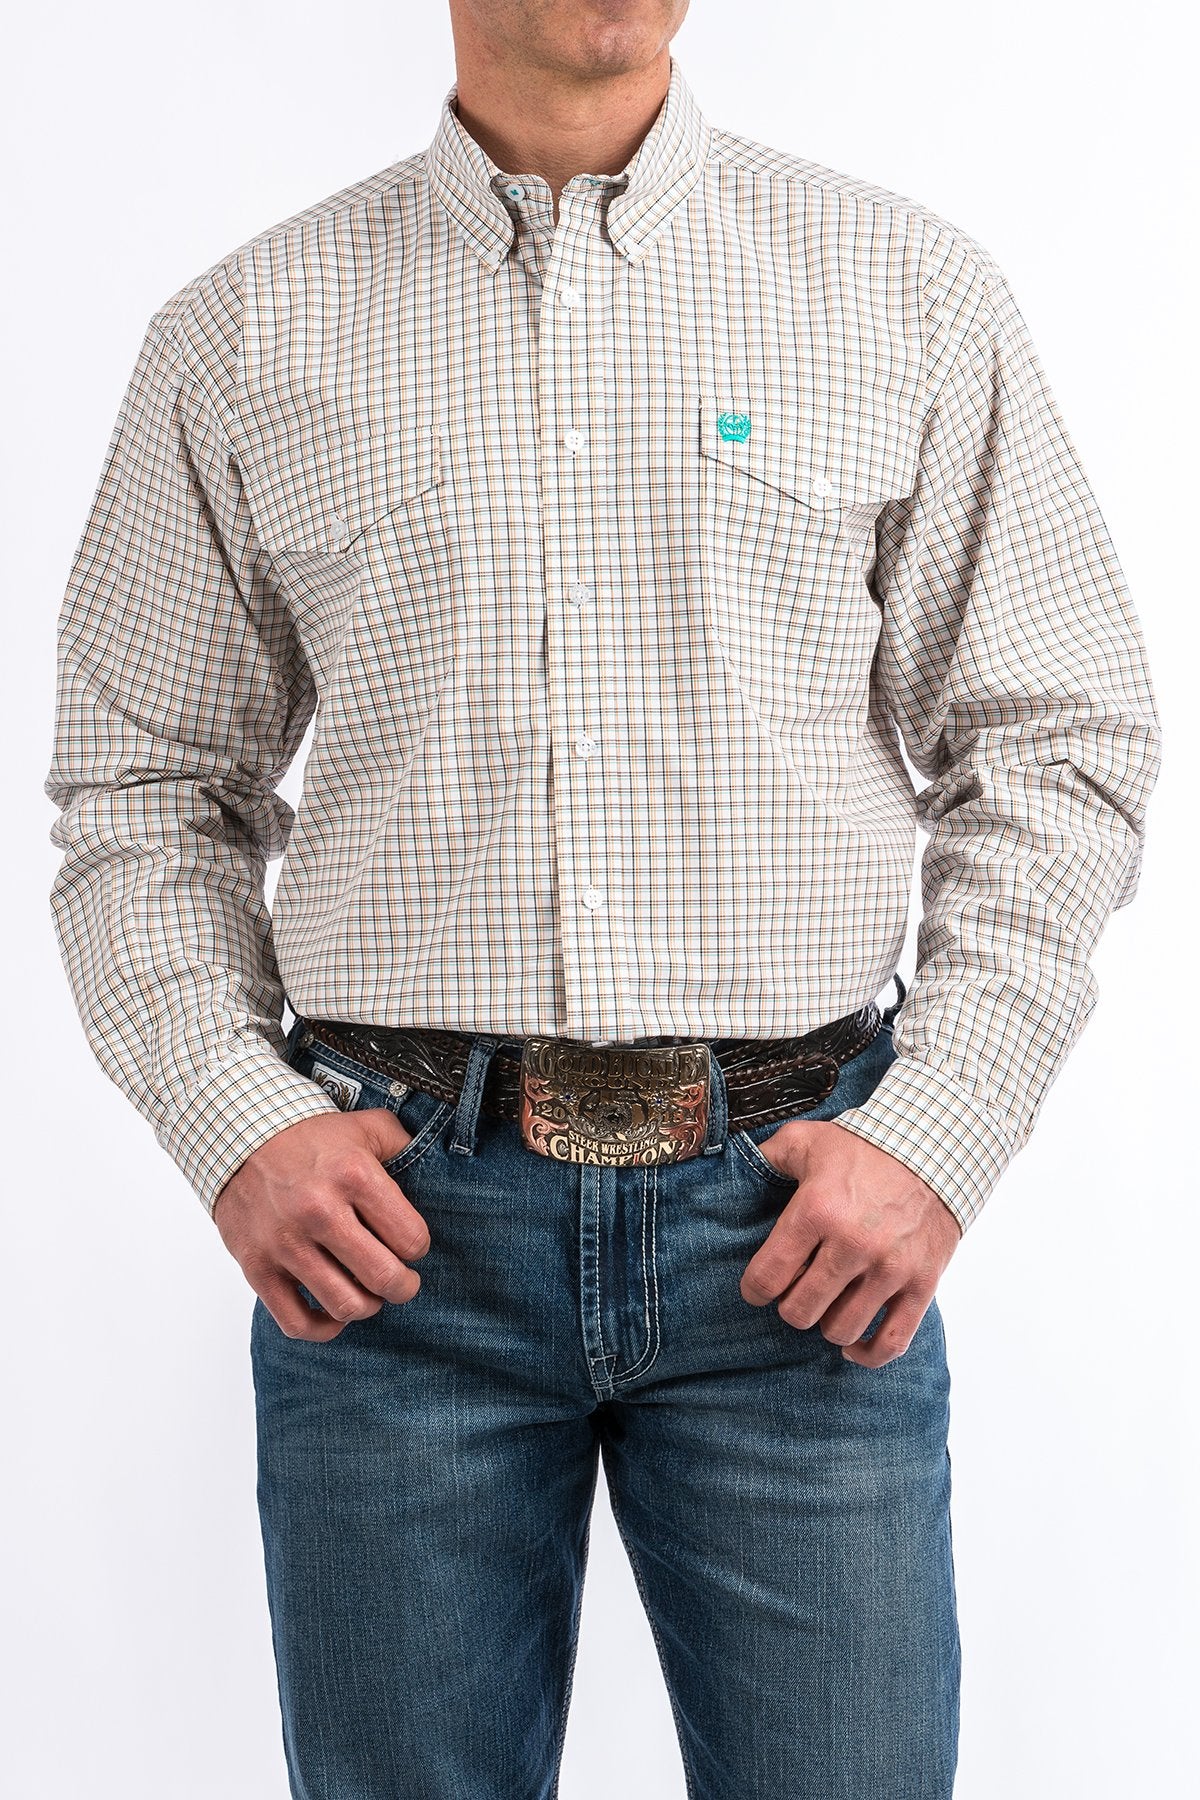 Cinch Mens L/S Shirt with double front pockets.- On Sale